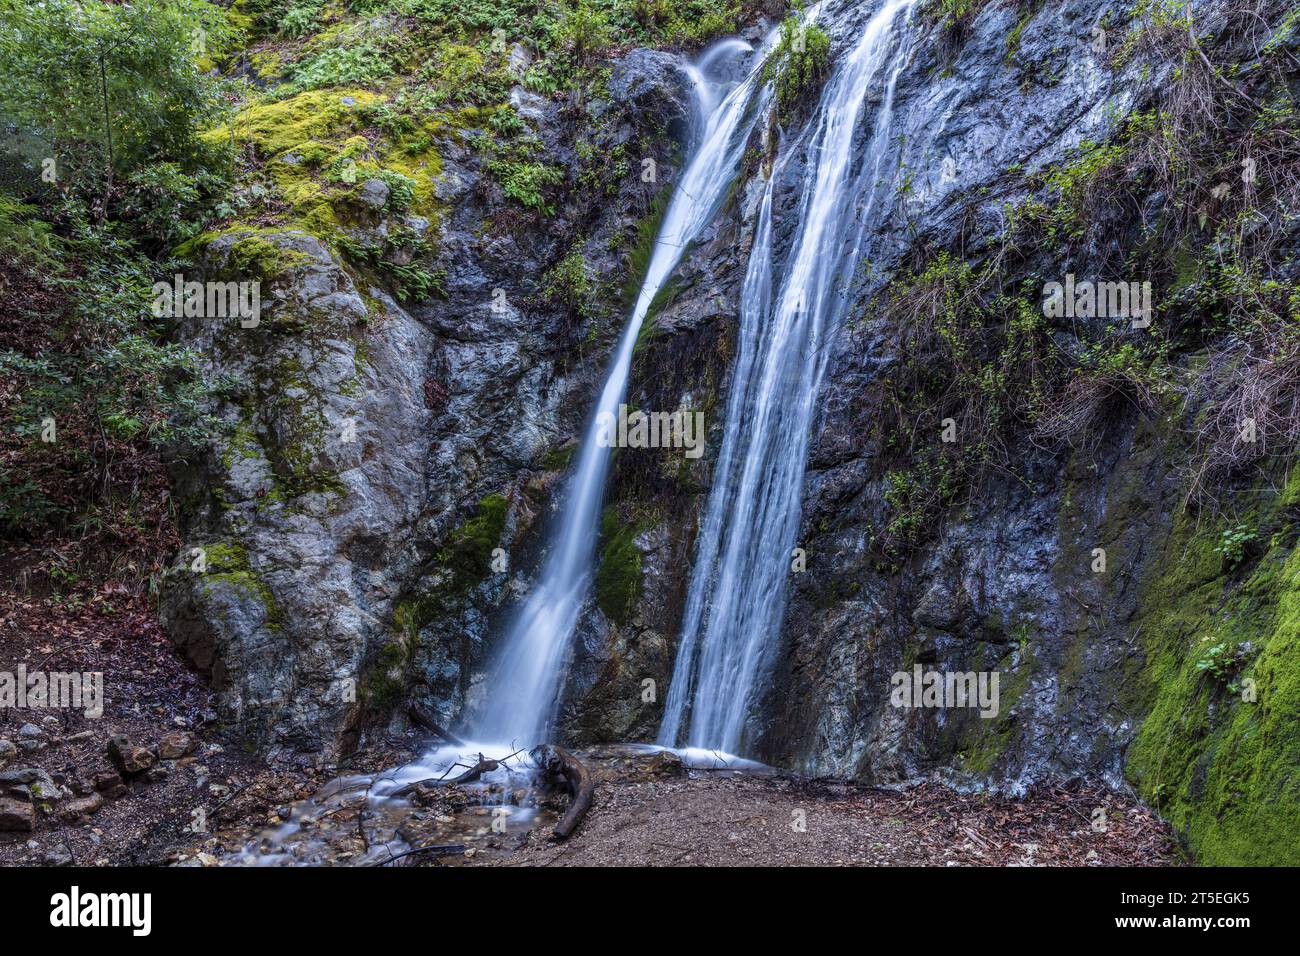 Peiffer Falls Waterfall, in Pfeiffer Big Sur State Park.Water cascading down stone cliff with green vegetation; Branches and sand below. Stock Photo